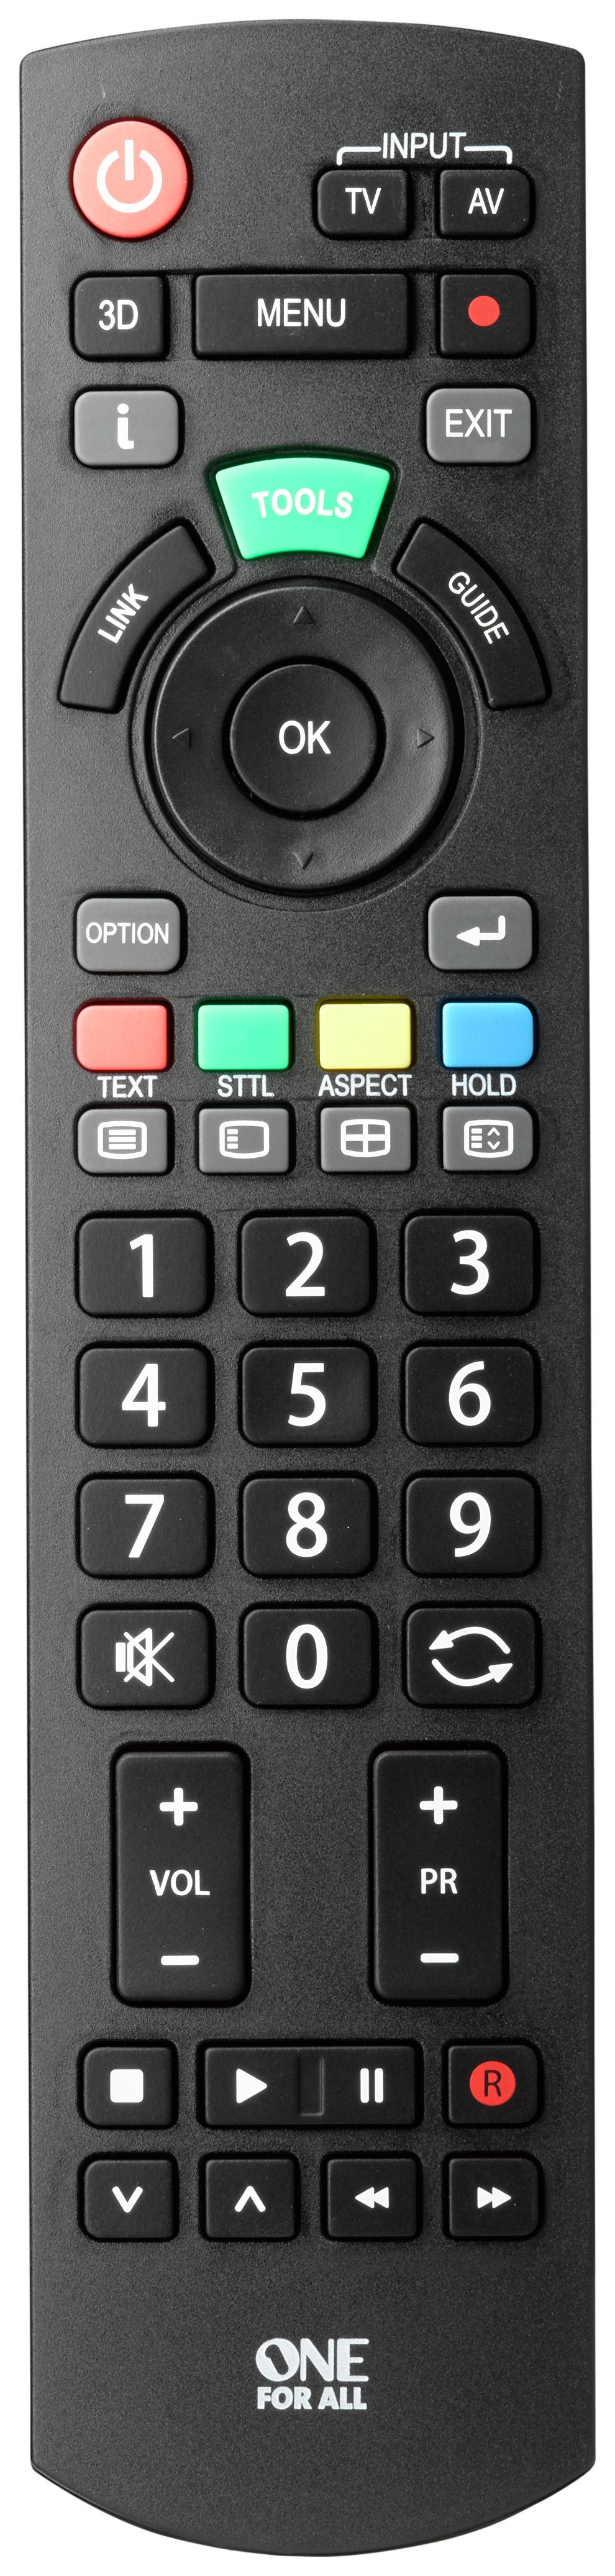 One For All Panasonic Replacement Remote Control Reviews